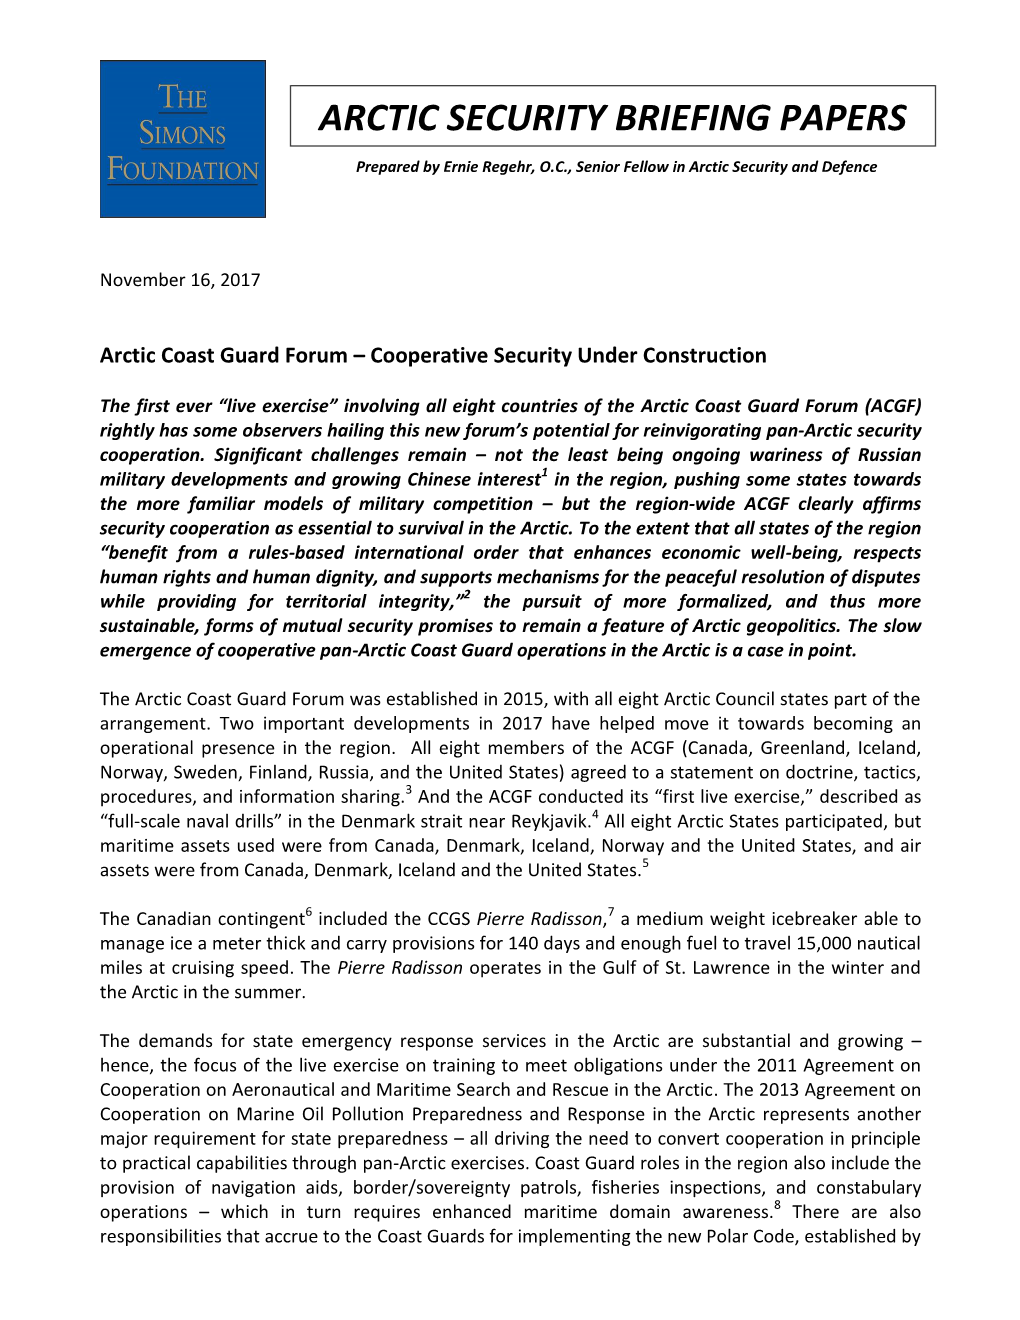 Arctic Security Briefing Papers